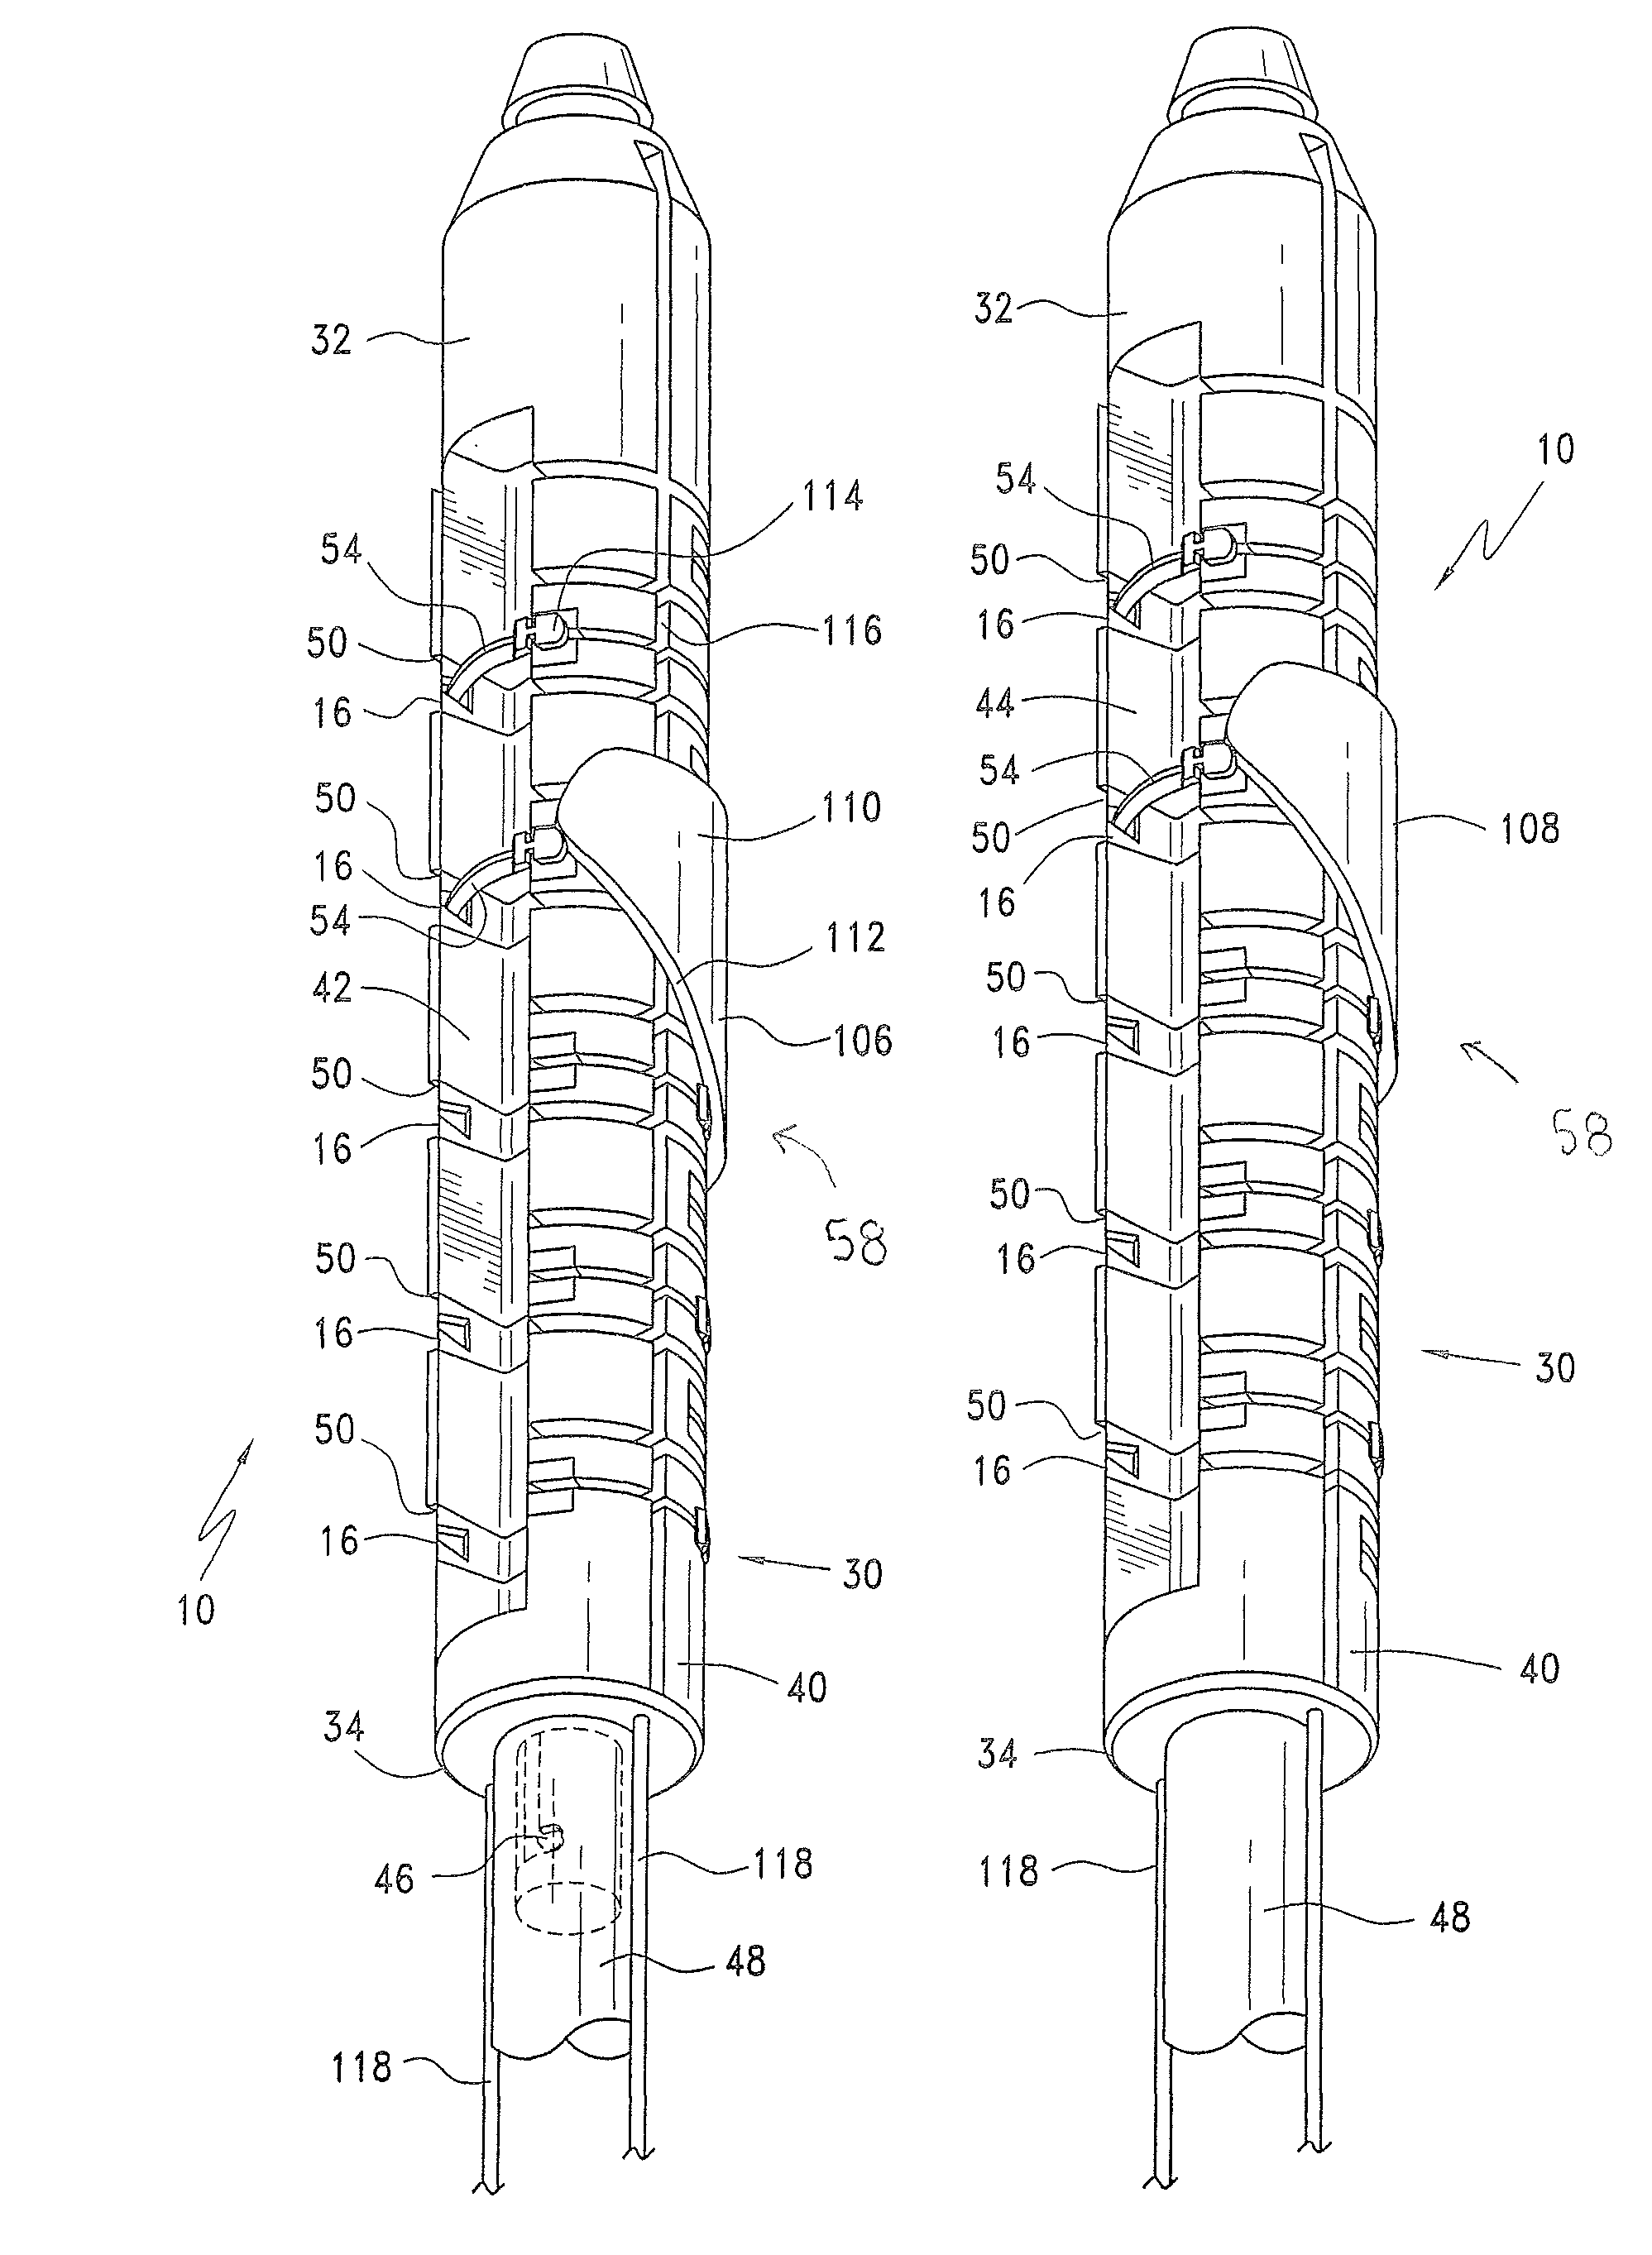 Method and apparatus for endoscopically performing gastric reduction surgery in a single step